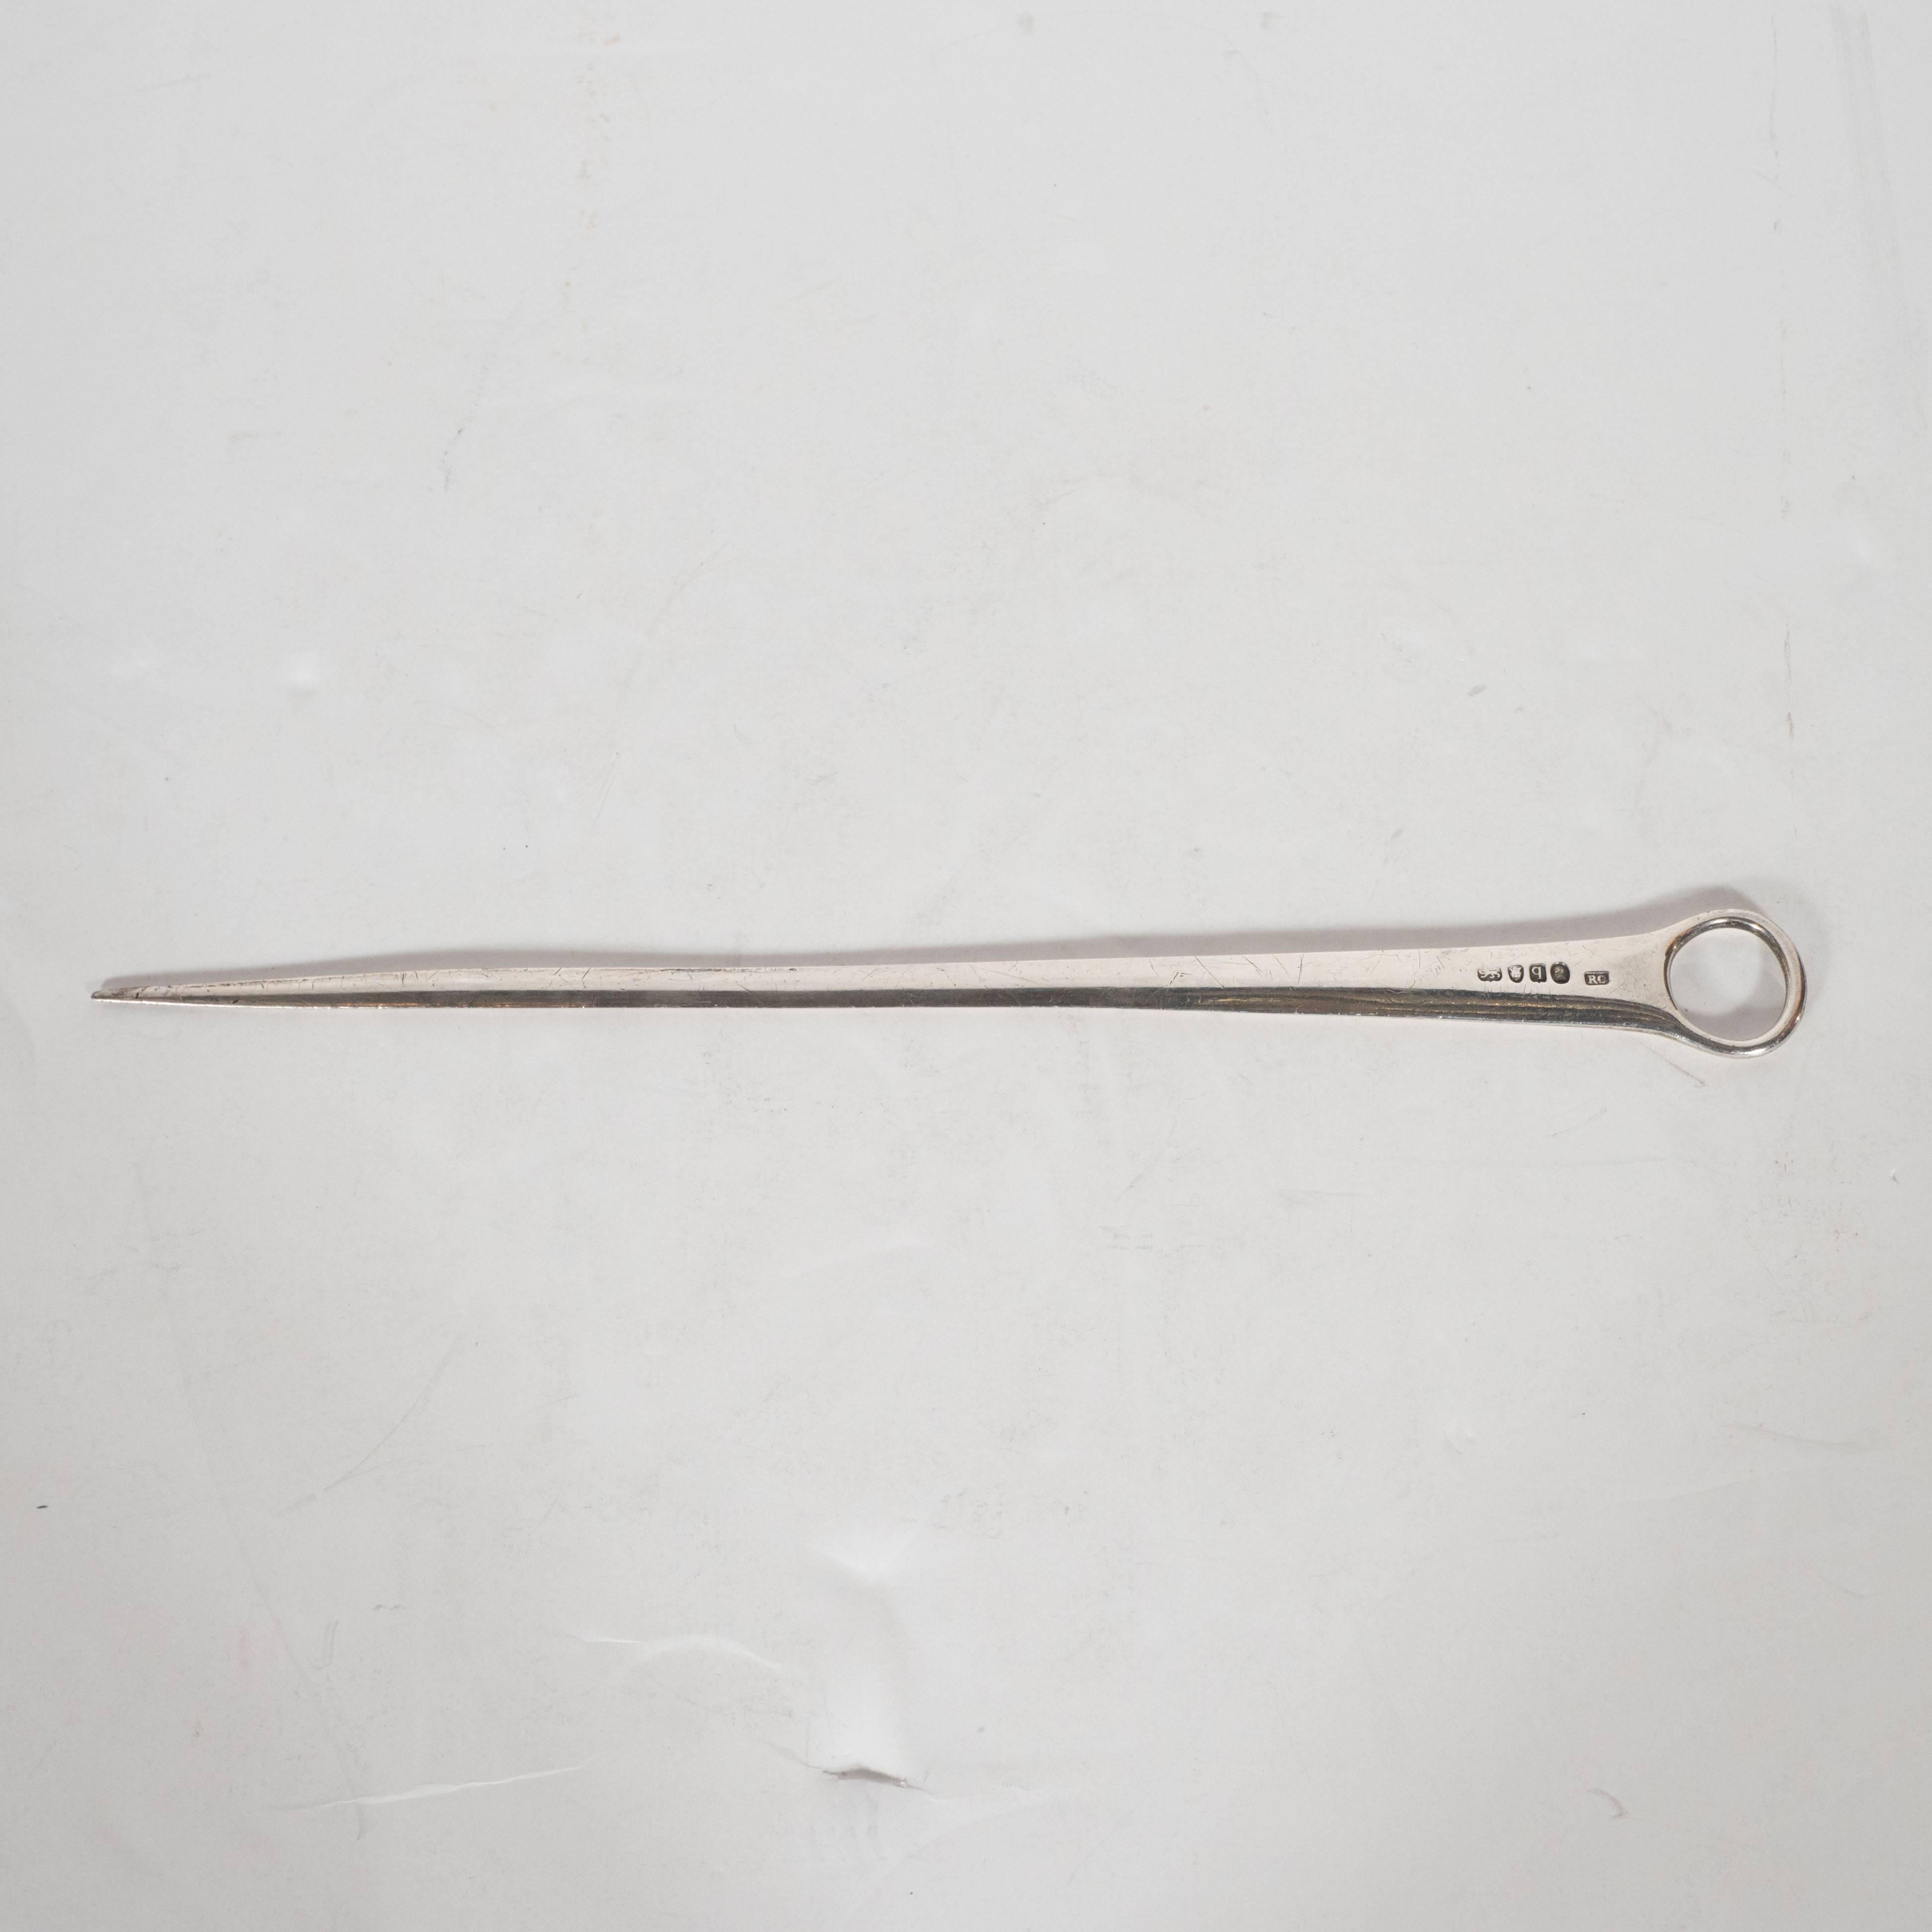 18th Century and Earlier 18th Century British Silver Plated Letter Opener by Robert Cruickshank